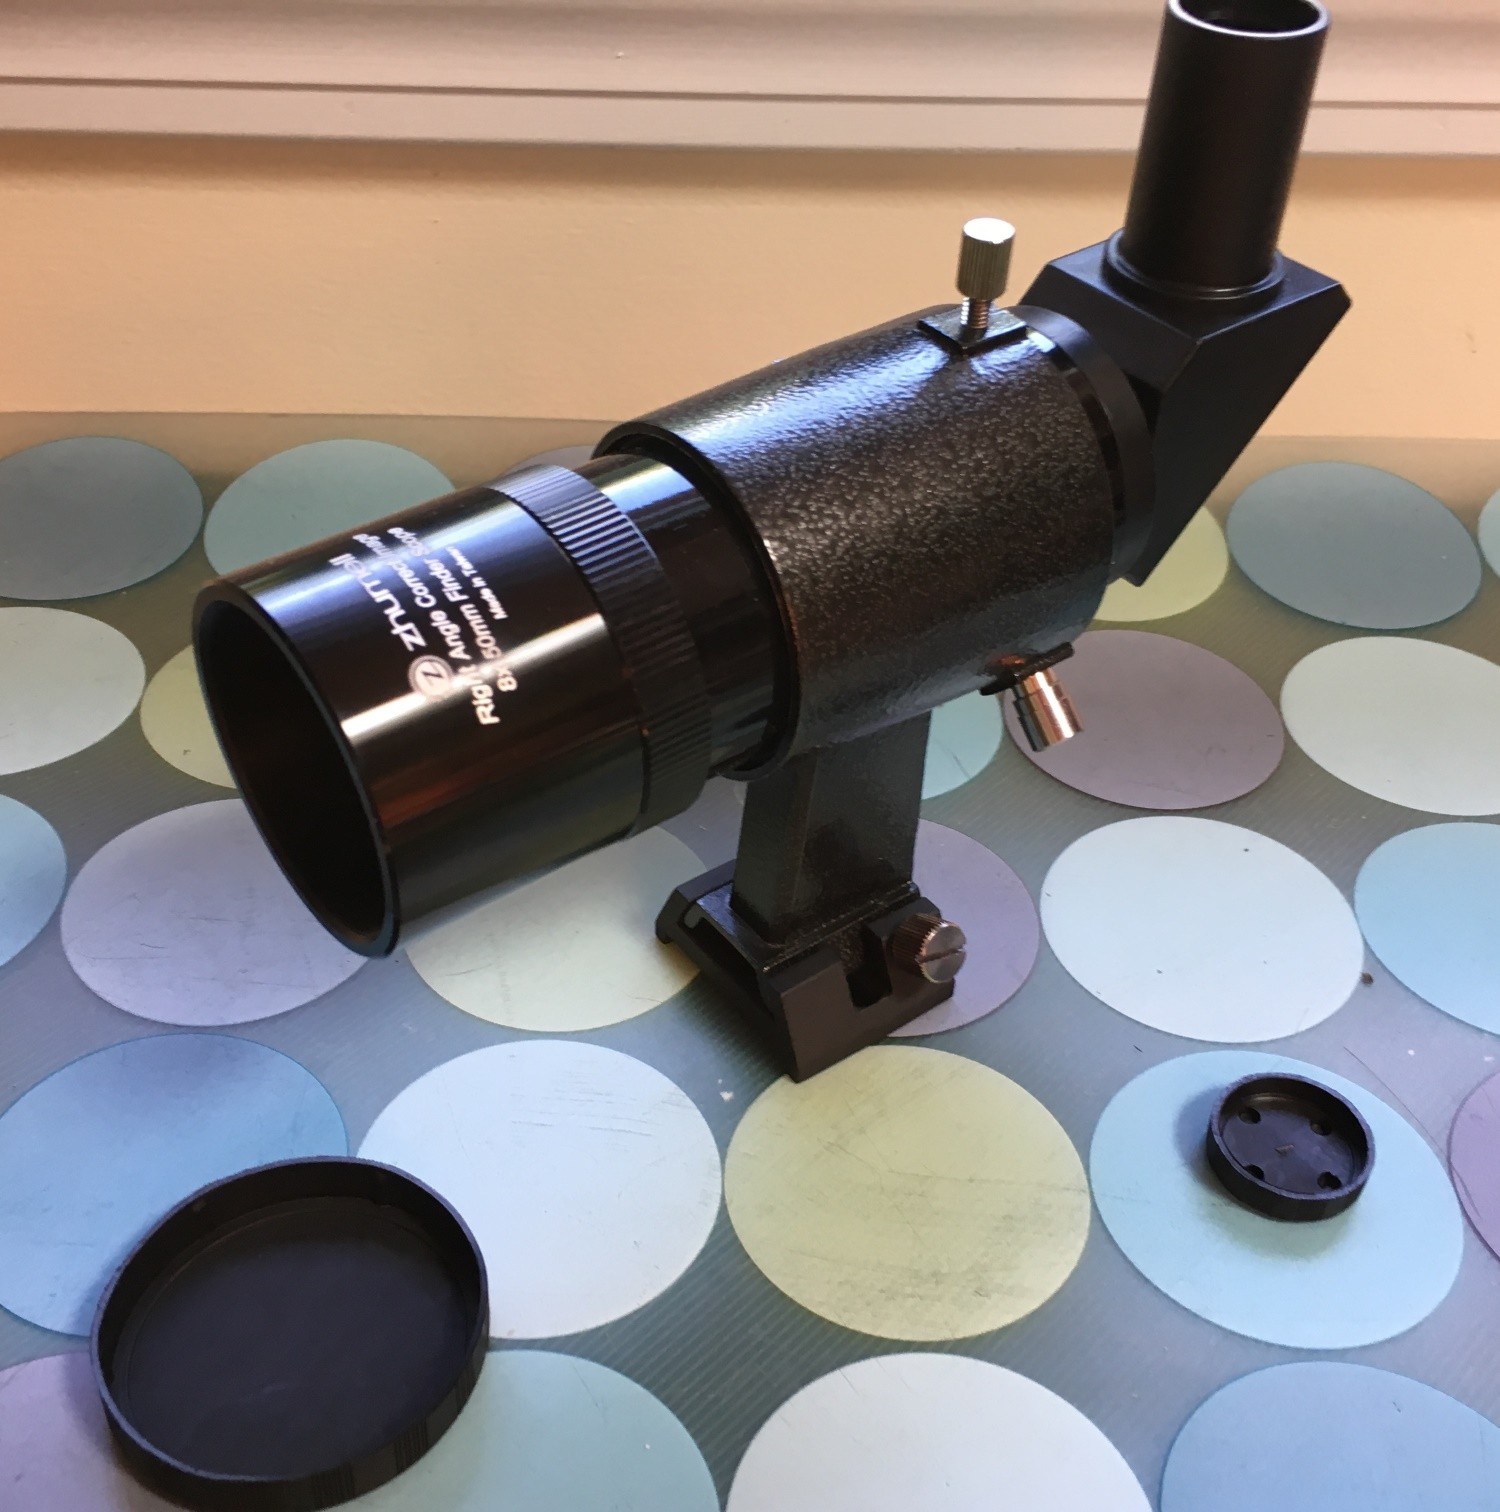 Zane's RACI that came with a SkyWatcher dobsonian telescope